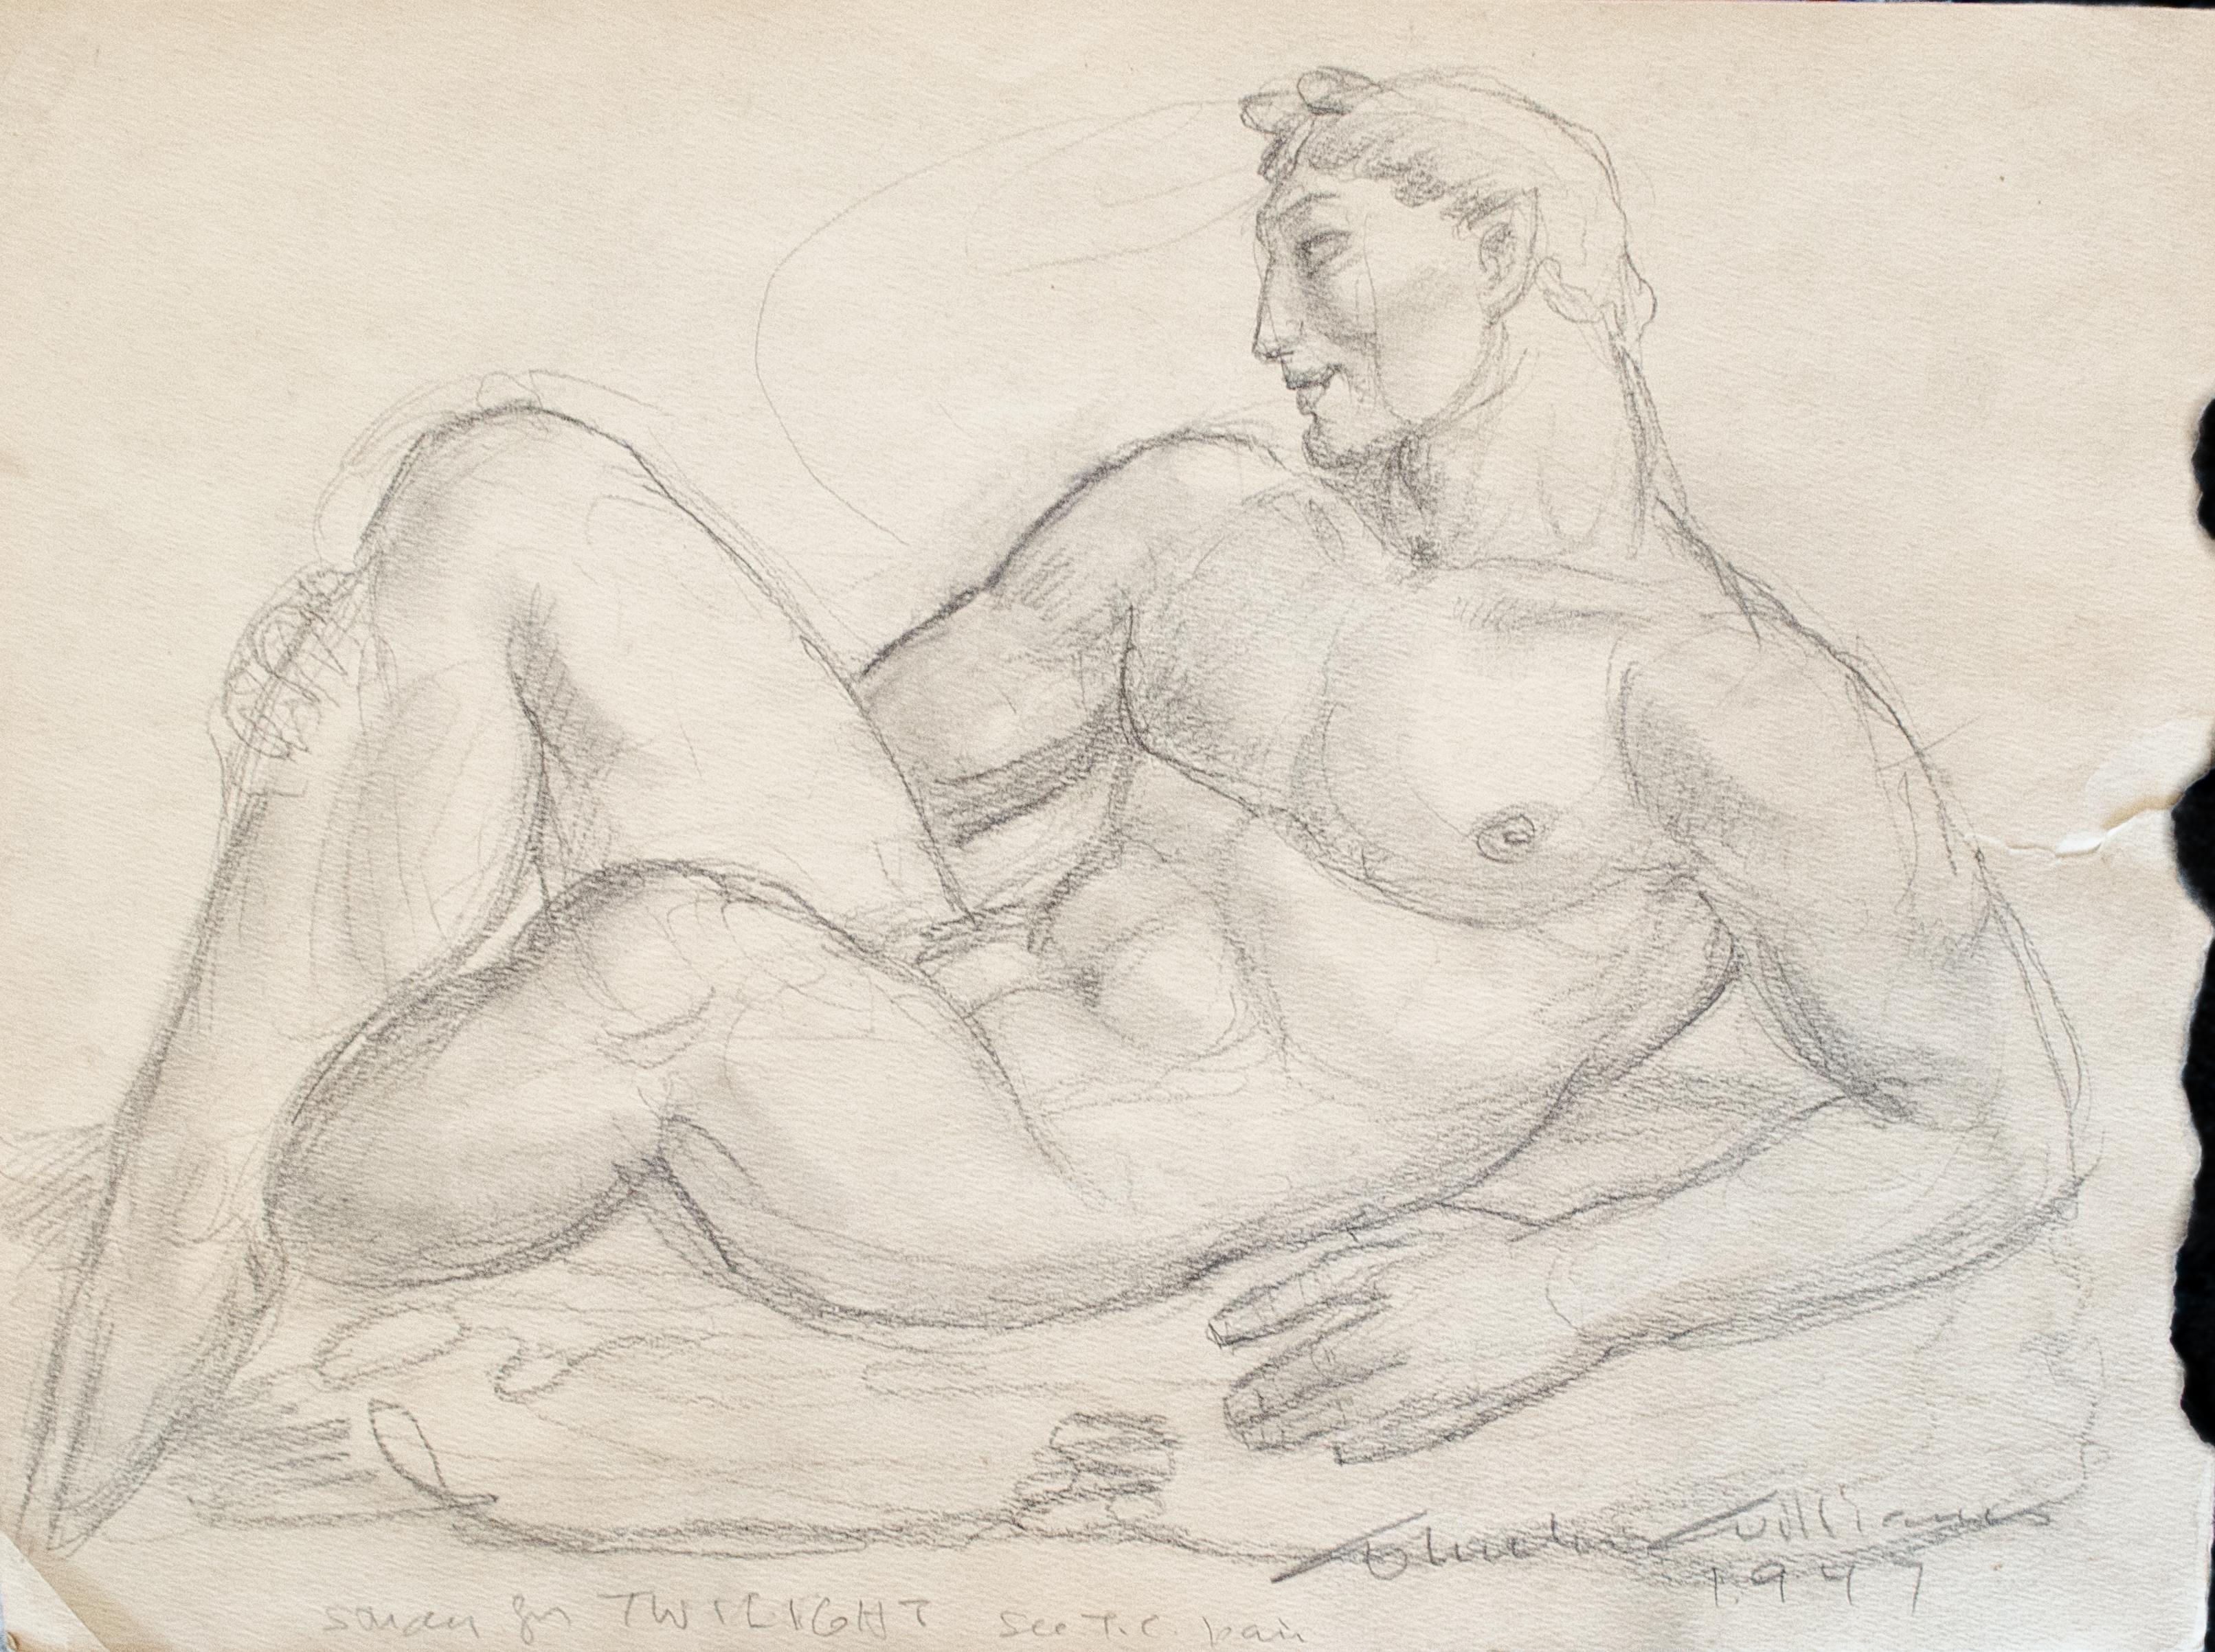 Wheeler Williams (American, 1897-1972)
Study for Twilight, 1947
Pencil on paper
9 1/4 x 12 1/4 in. 
Signed lower right: Wheeler Williams, 1947
Inscribed: Study for Twilight

A native of Chicago, Wheeler Williams is known for his allegorical,